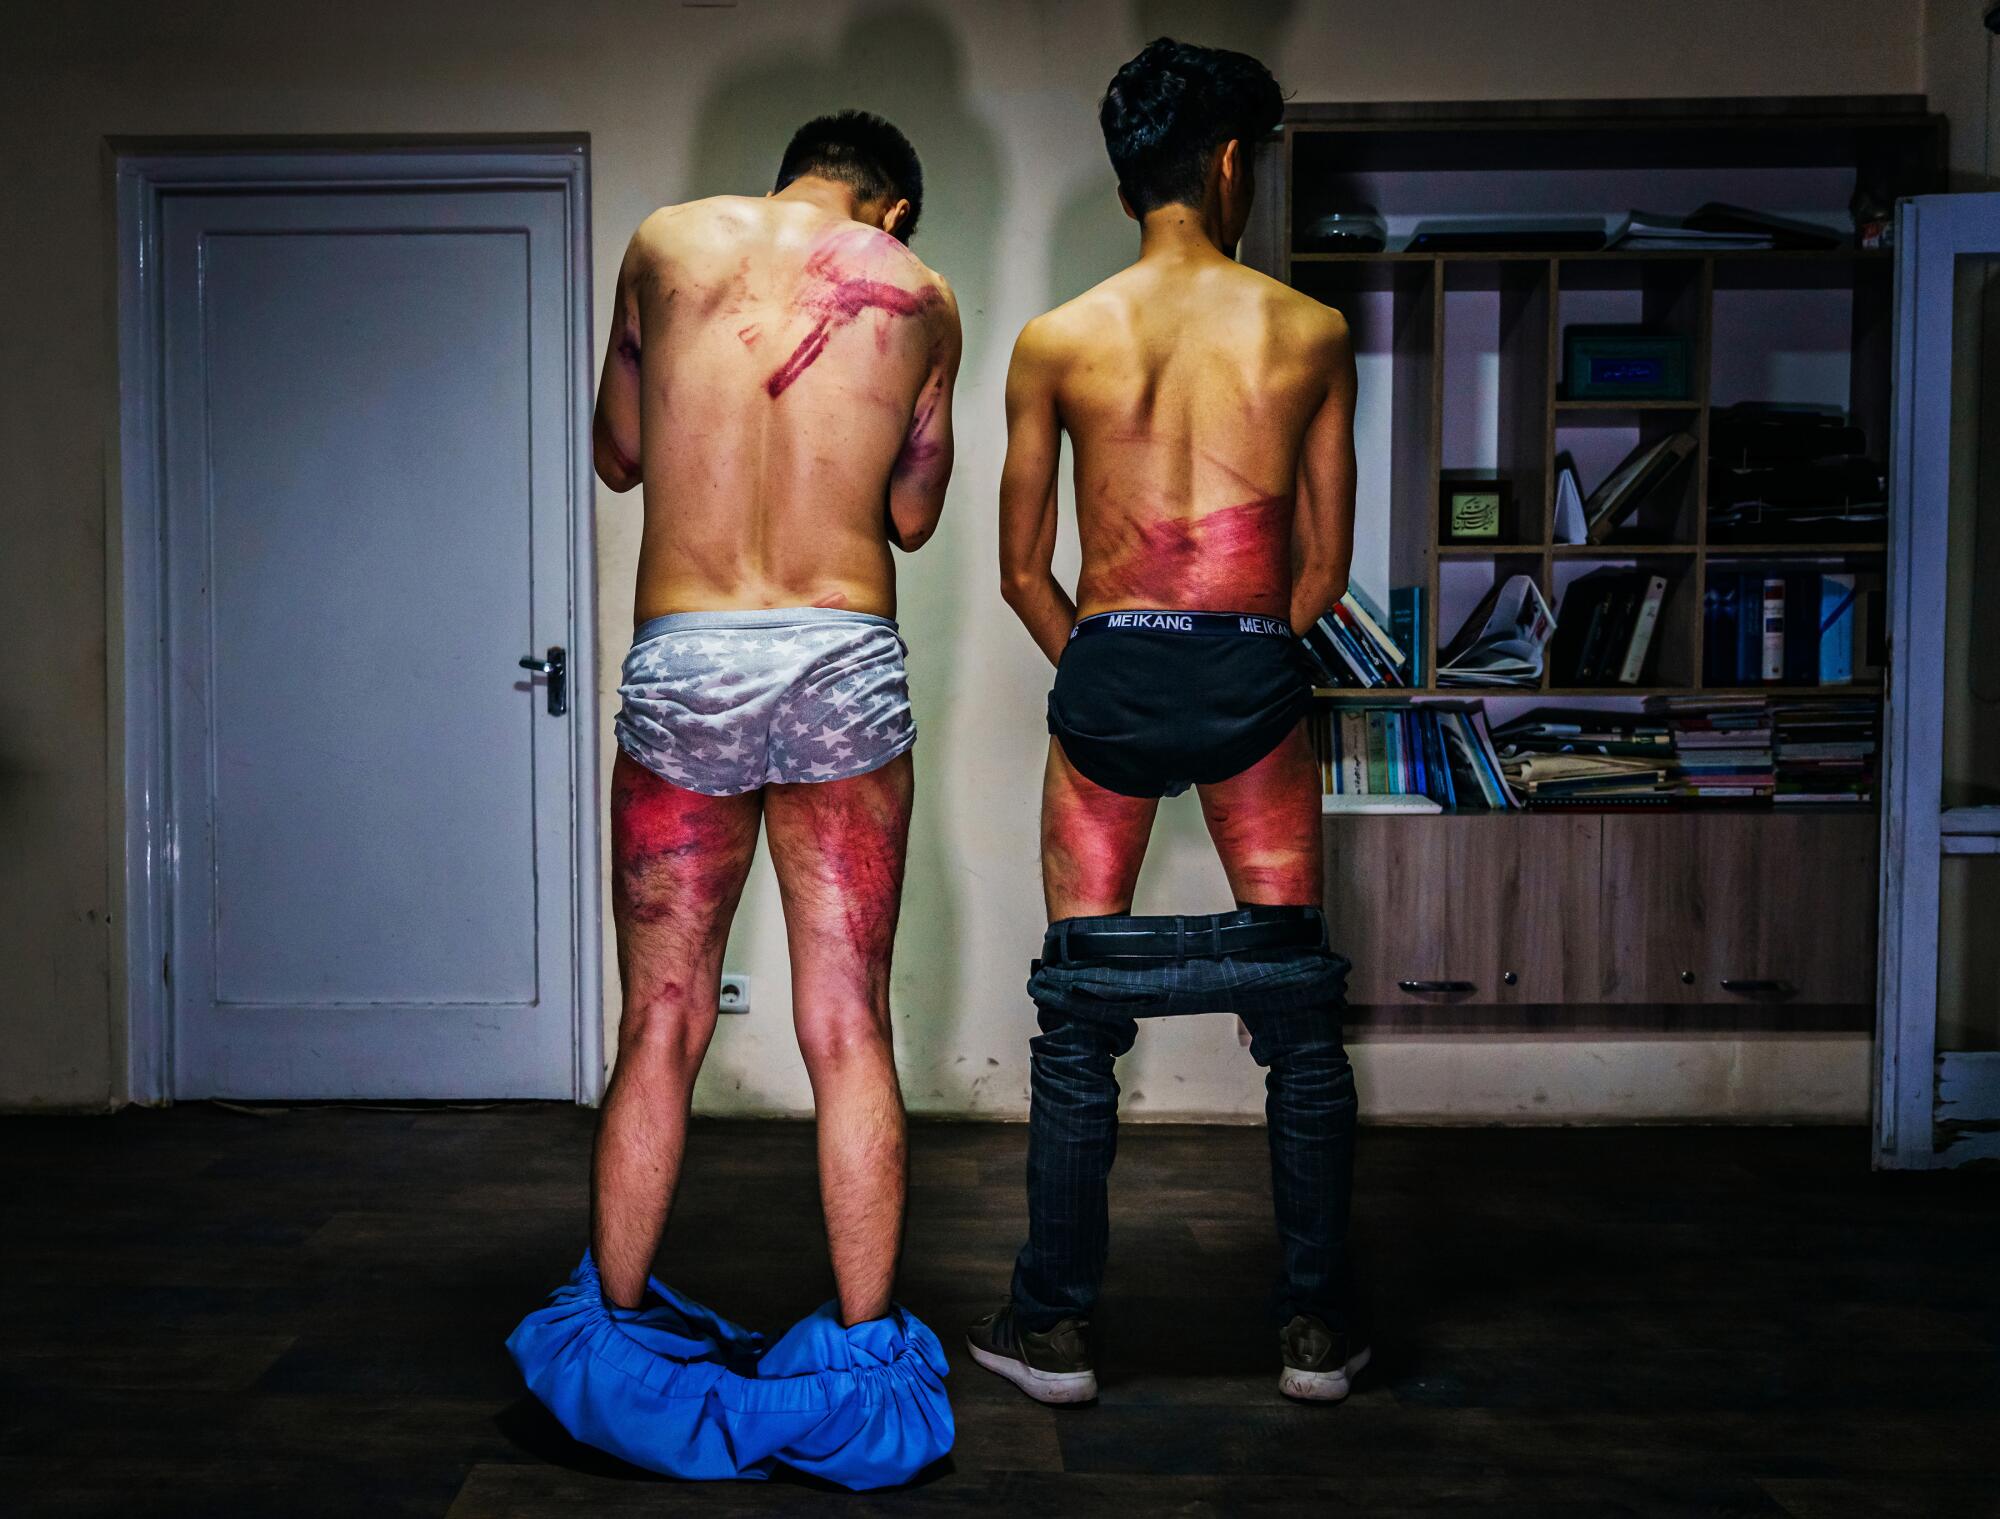 Two men bare the wounds on their back and legs.